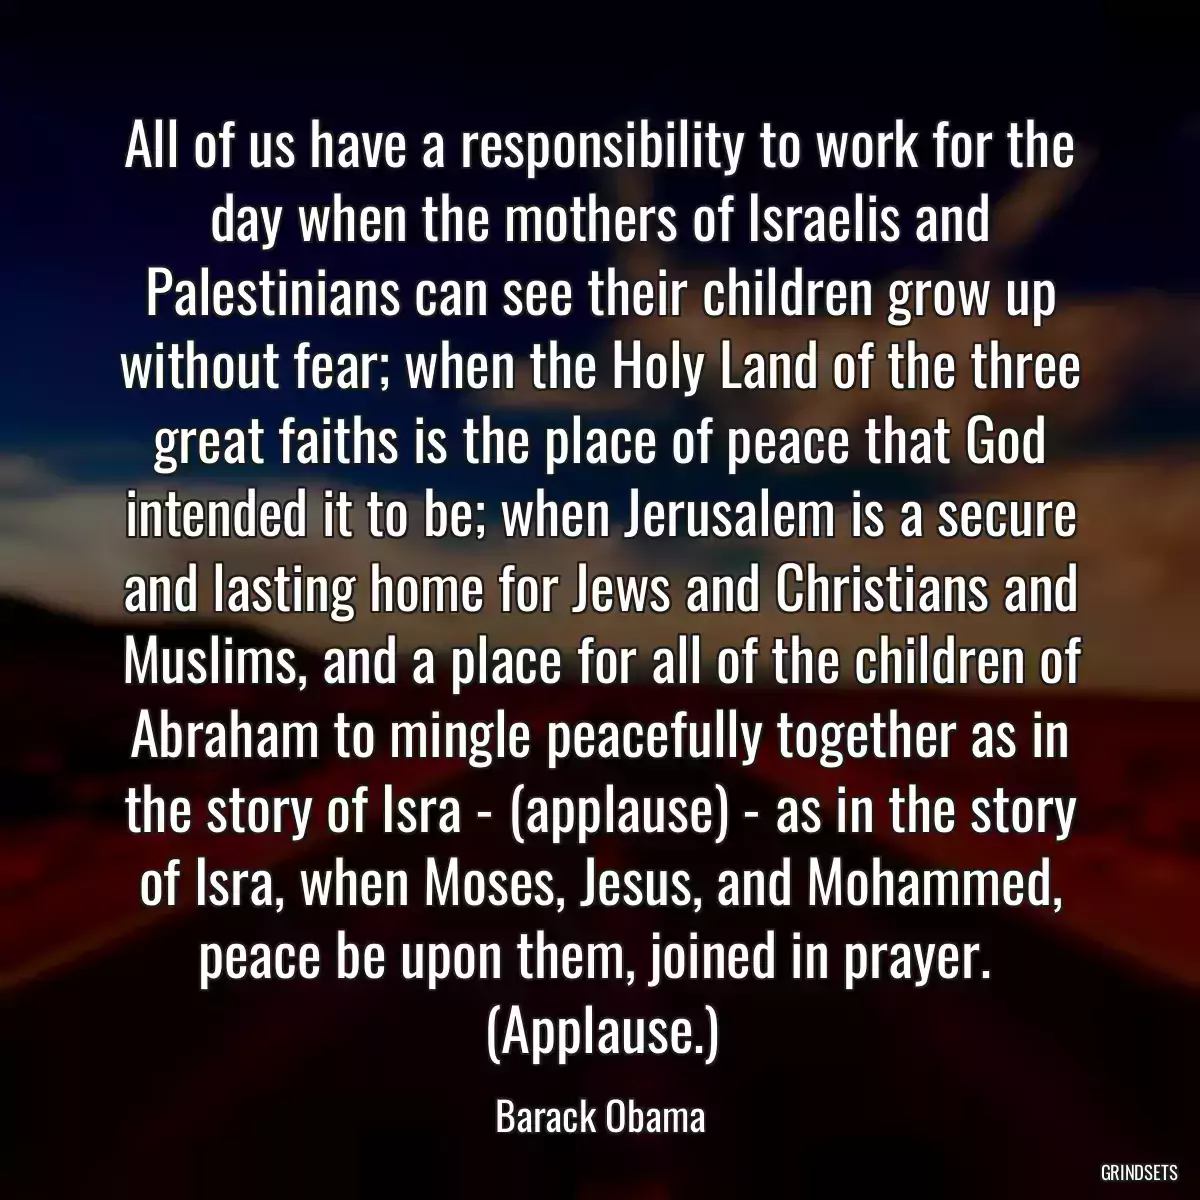 All of us have a responsibility to work for the day when the mothers of Israelis and Palestinians can see their children grow up without fear; when the Holy Land of the three great faiths is the place of peace that God intended it to be; when Jerusalem is a secure and lasting home for Jews and Christians and Muslims, and a place for all of the children of Abraham to mingle peacefully together as in the story of Isra - (applause) - as in the story of Isra, when Moses, Jesus, and Mohammed, peace be upon them, joined in prayer.  (Applause.)